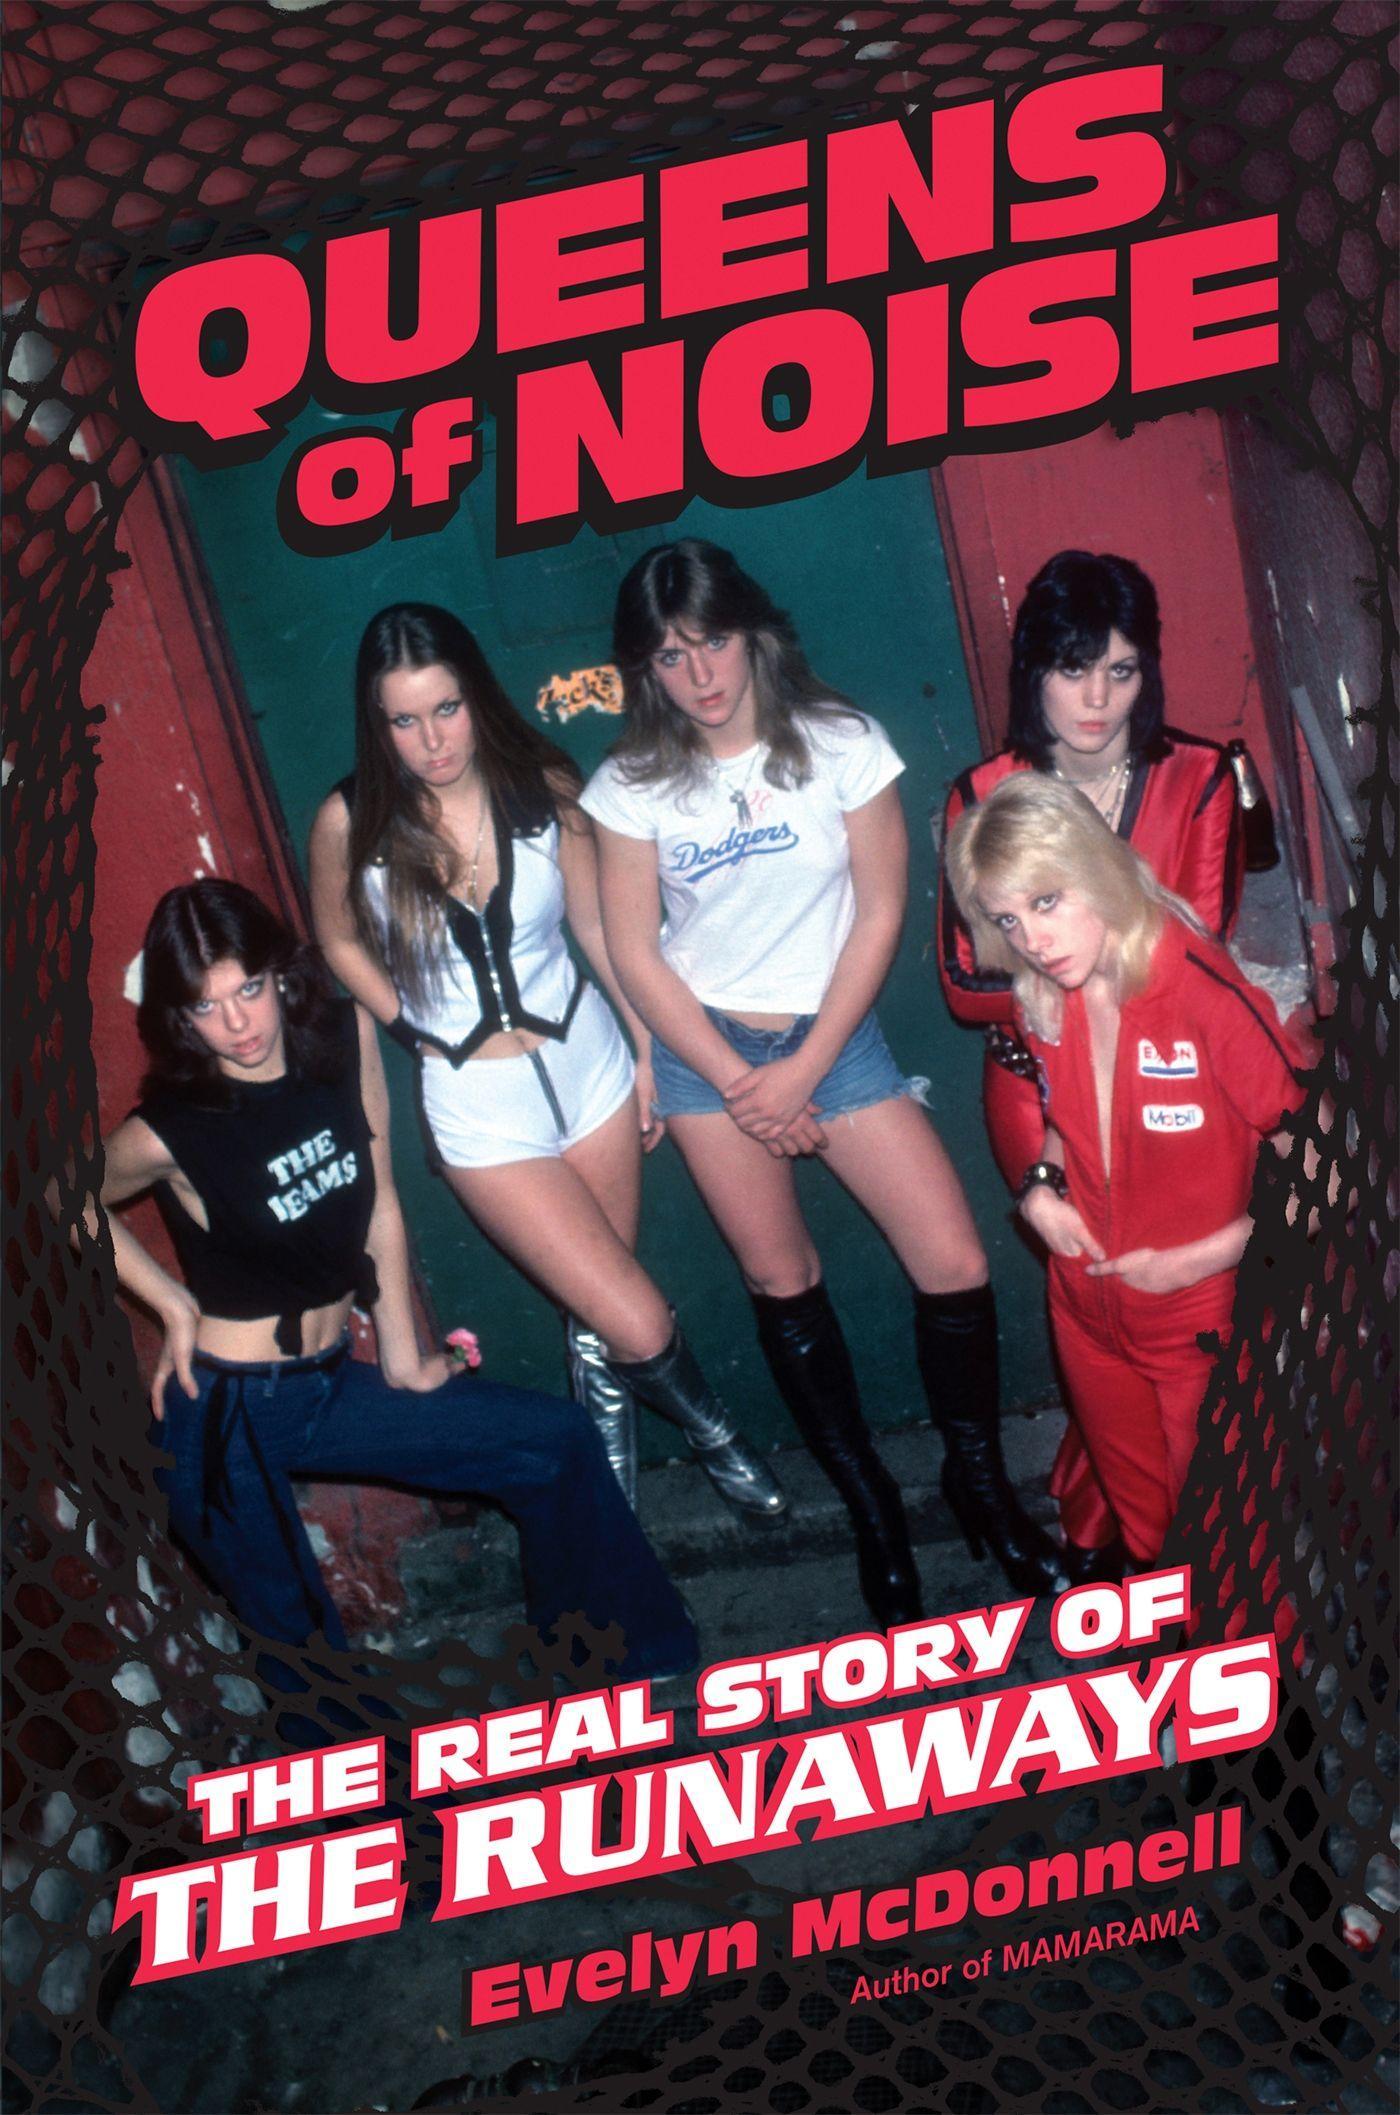 Queens of Noise / The Real Story of the Runaways / Evelyn McDonnell / Buch / Englisch / 2013 / Hachette Book Group USA / EAN 9780306820397 - McDonnell, Evelyn